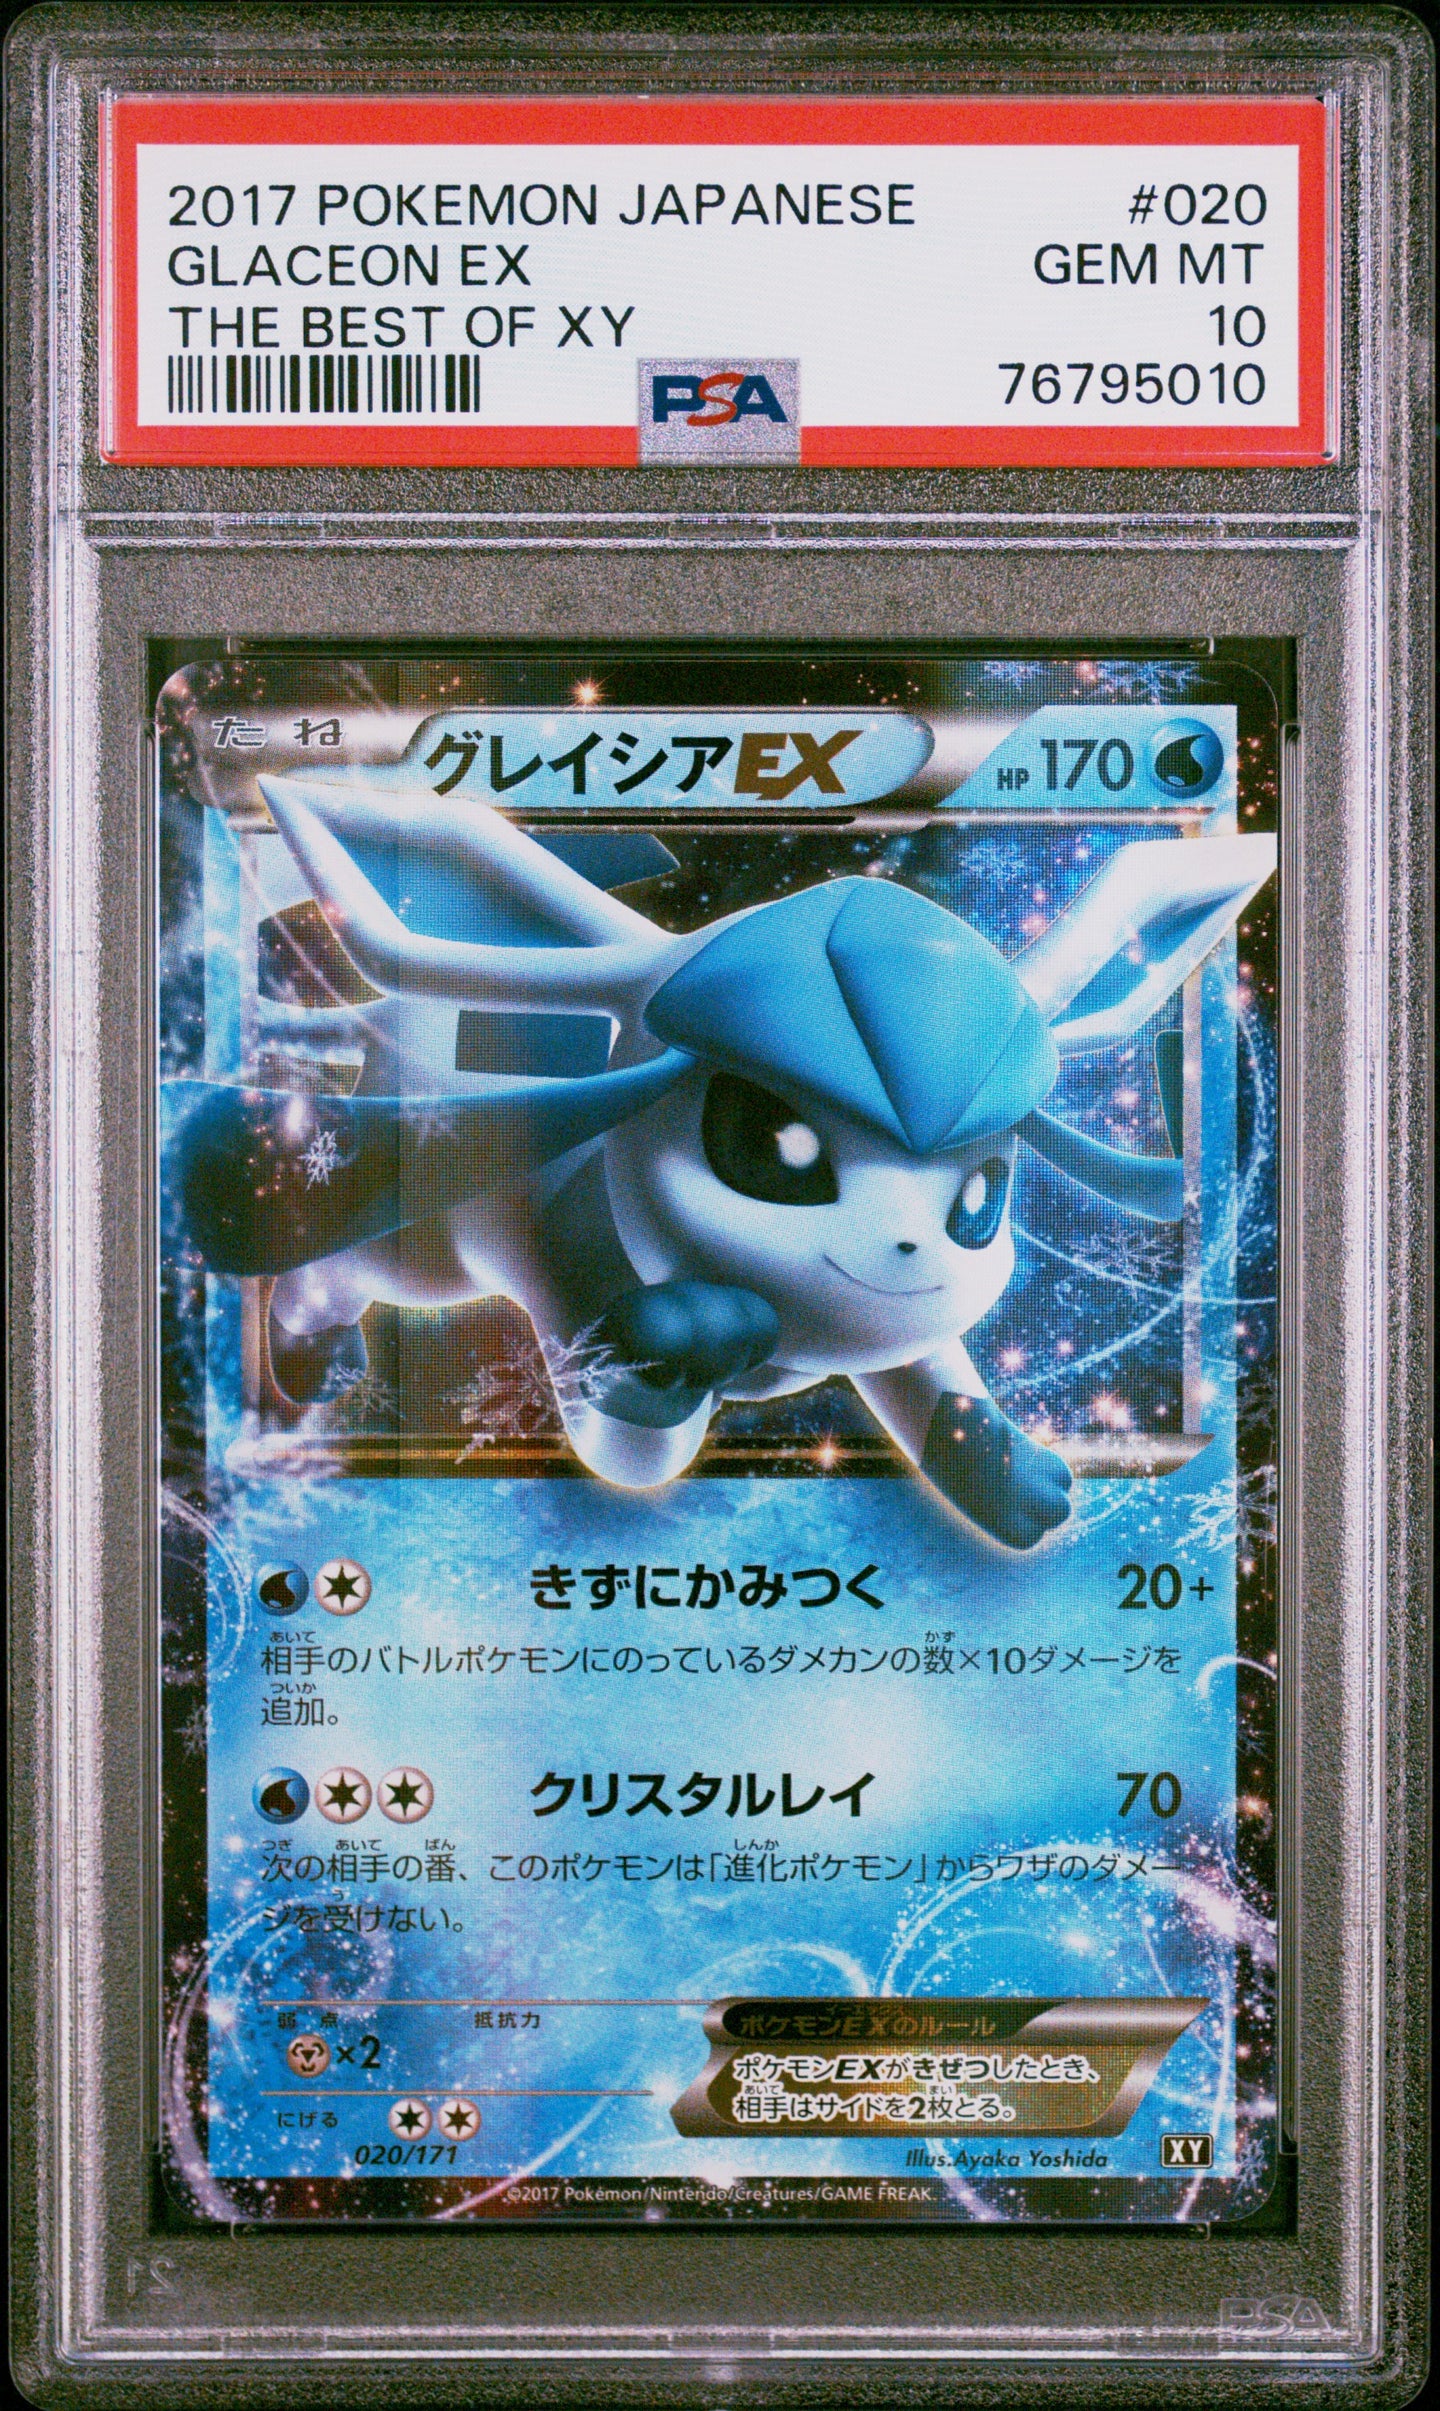 PSA 10 Japanese Glaceon EX (Graded Card)